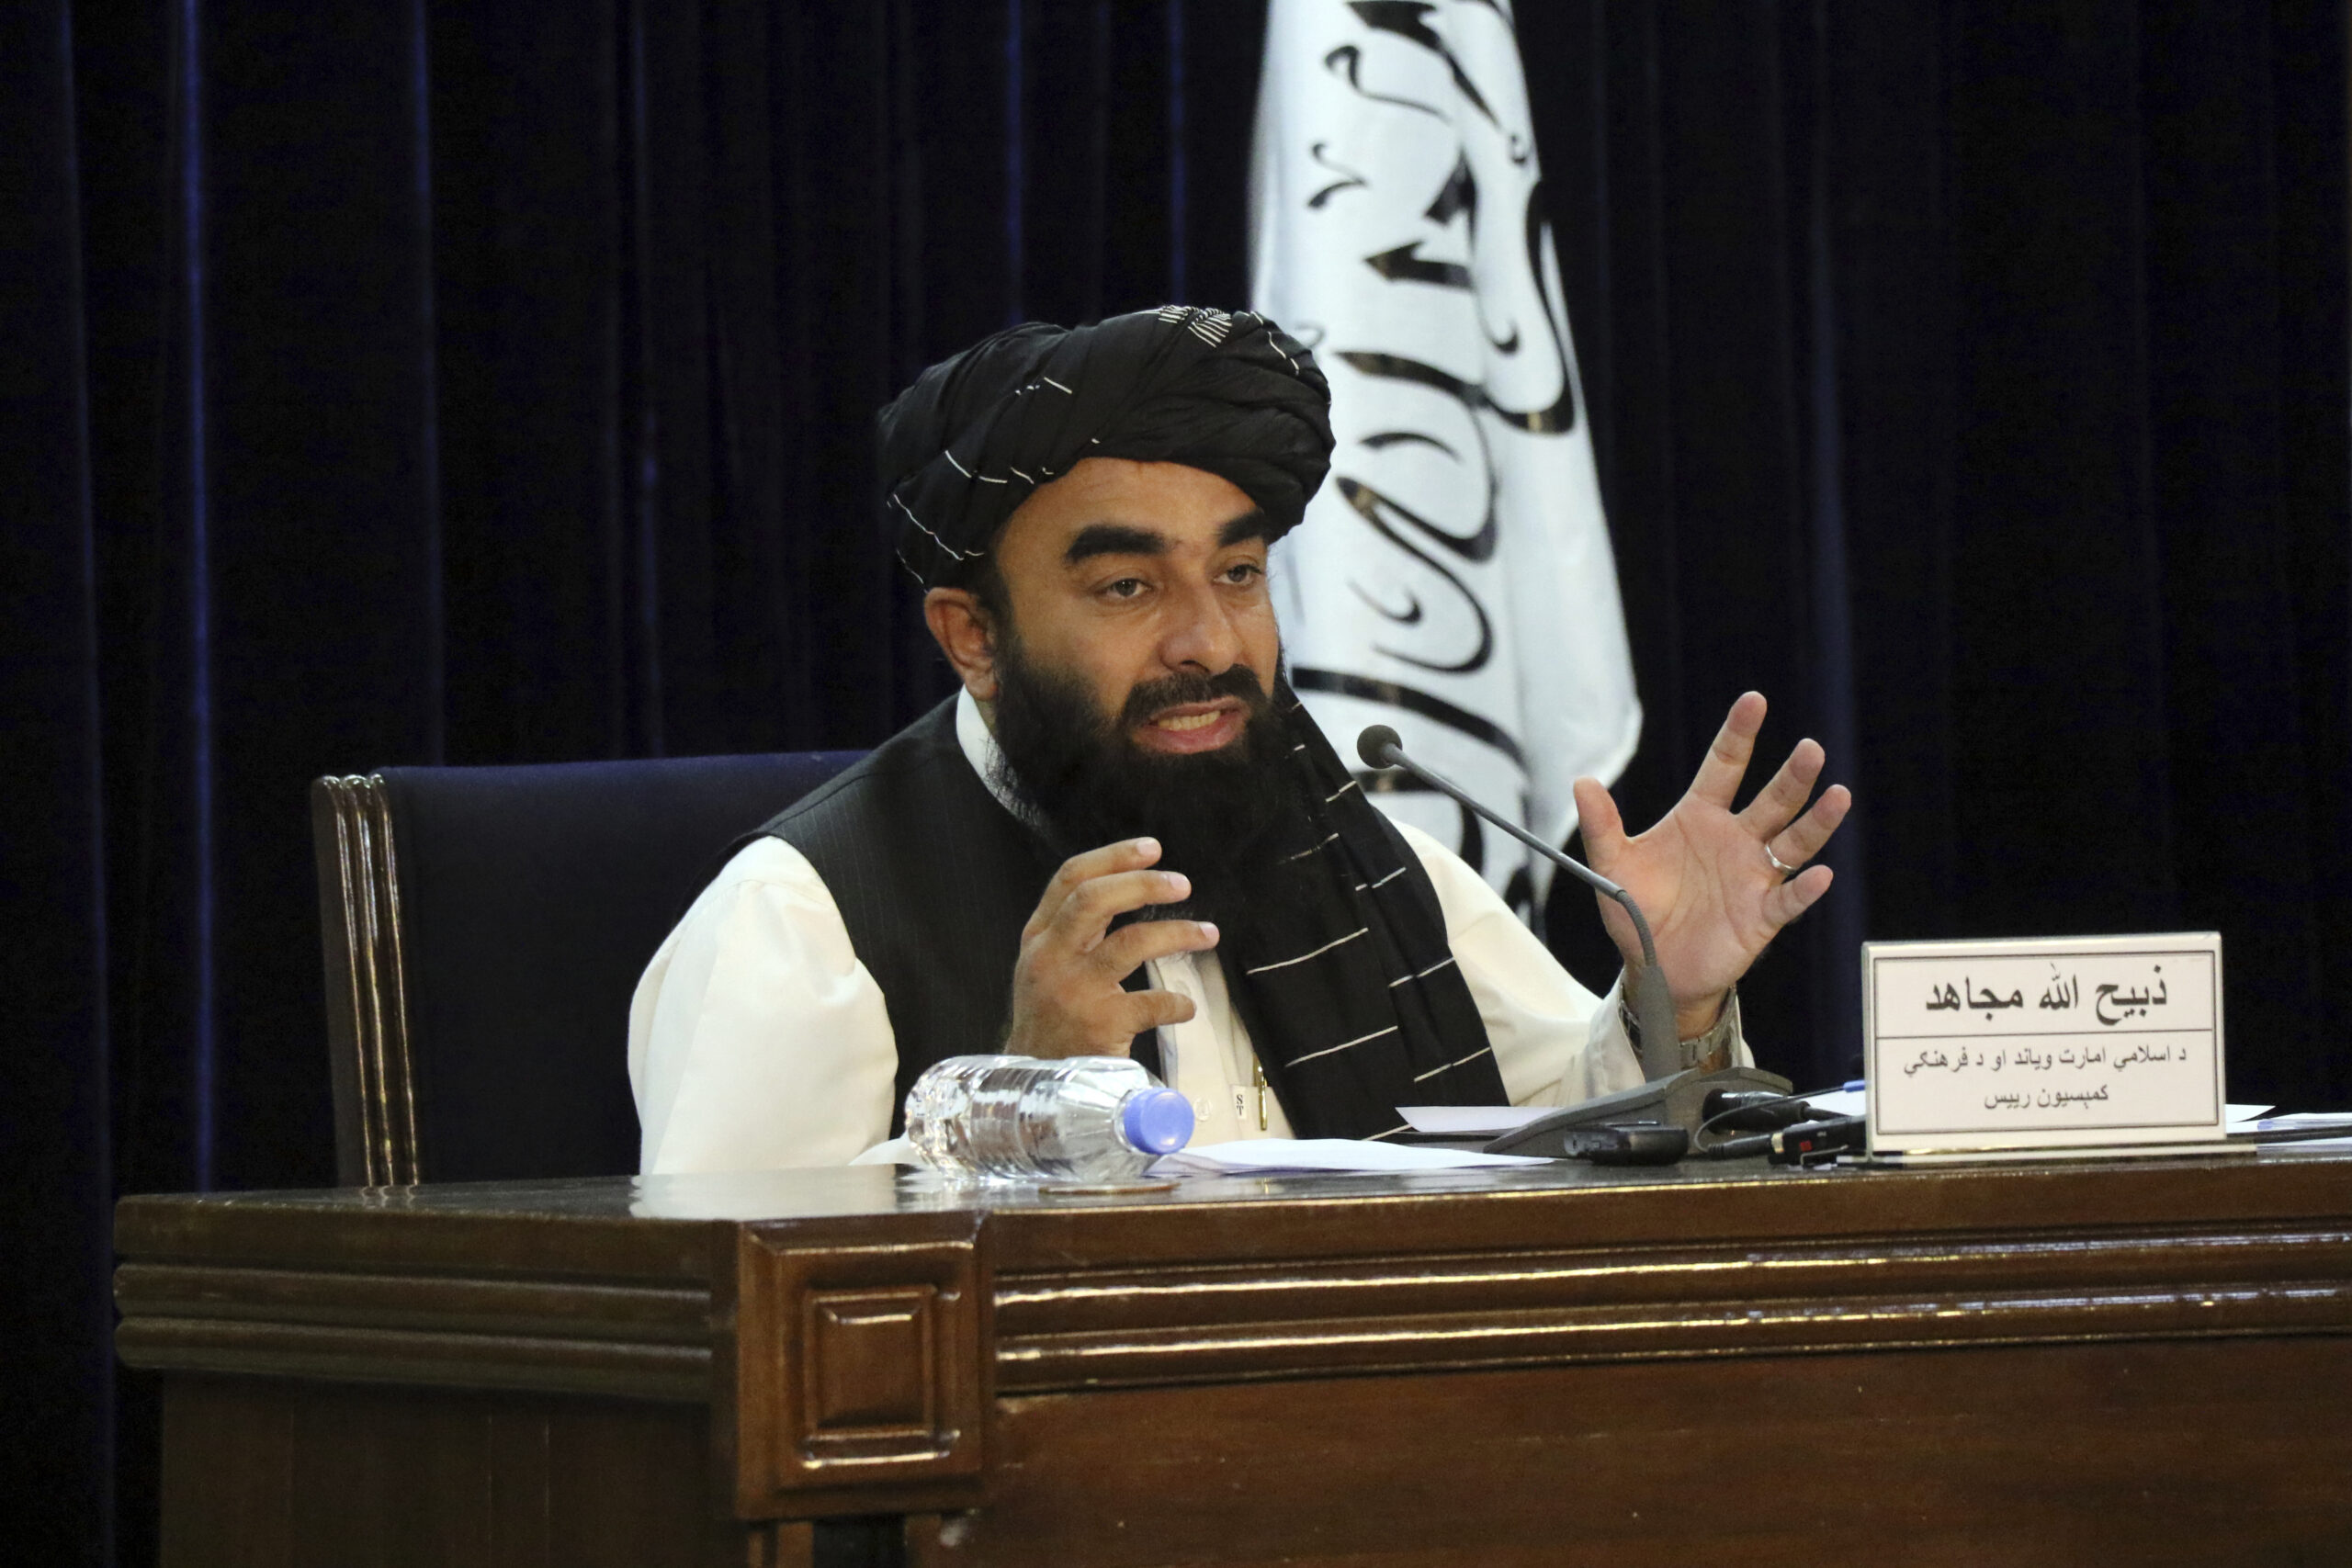 Taliban spokesman Zabihullah Mujahid speaks during a press conference in Kabul, Afghanistan Tuesday, Sept. 7, 2021. The Taliban on Tuesday announced a caretaker Cabinet stacked with veterans of their harsh rule in the late 1990s and subsequent 20-year battle against the U.S.-led coalition and its Afghan government allies. The line-up announced at the press conference is not likely to win the international support the Taliban so desperately need to avoid an economic meltdown. (AP Photo/Muhammad Farooq)